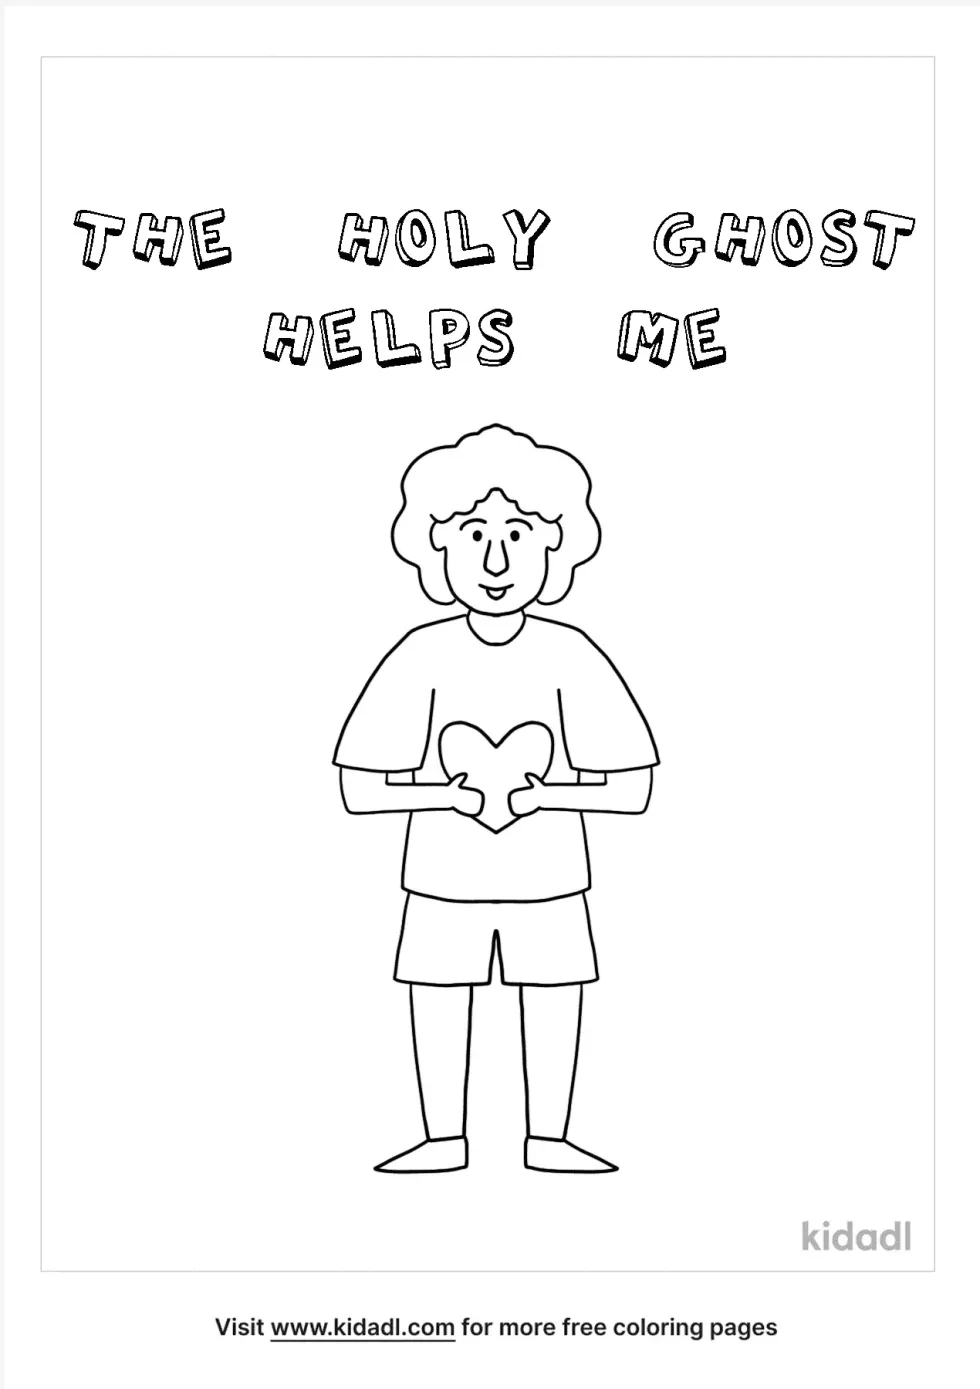 The Holy Ghost Helps Me